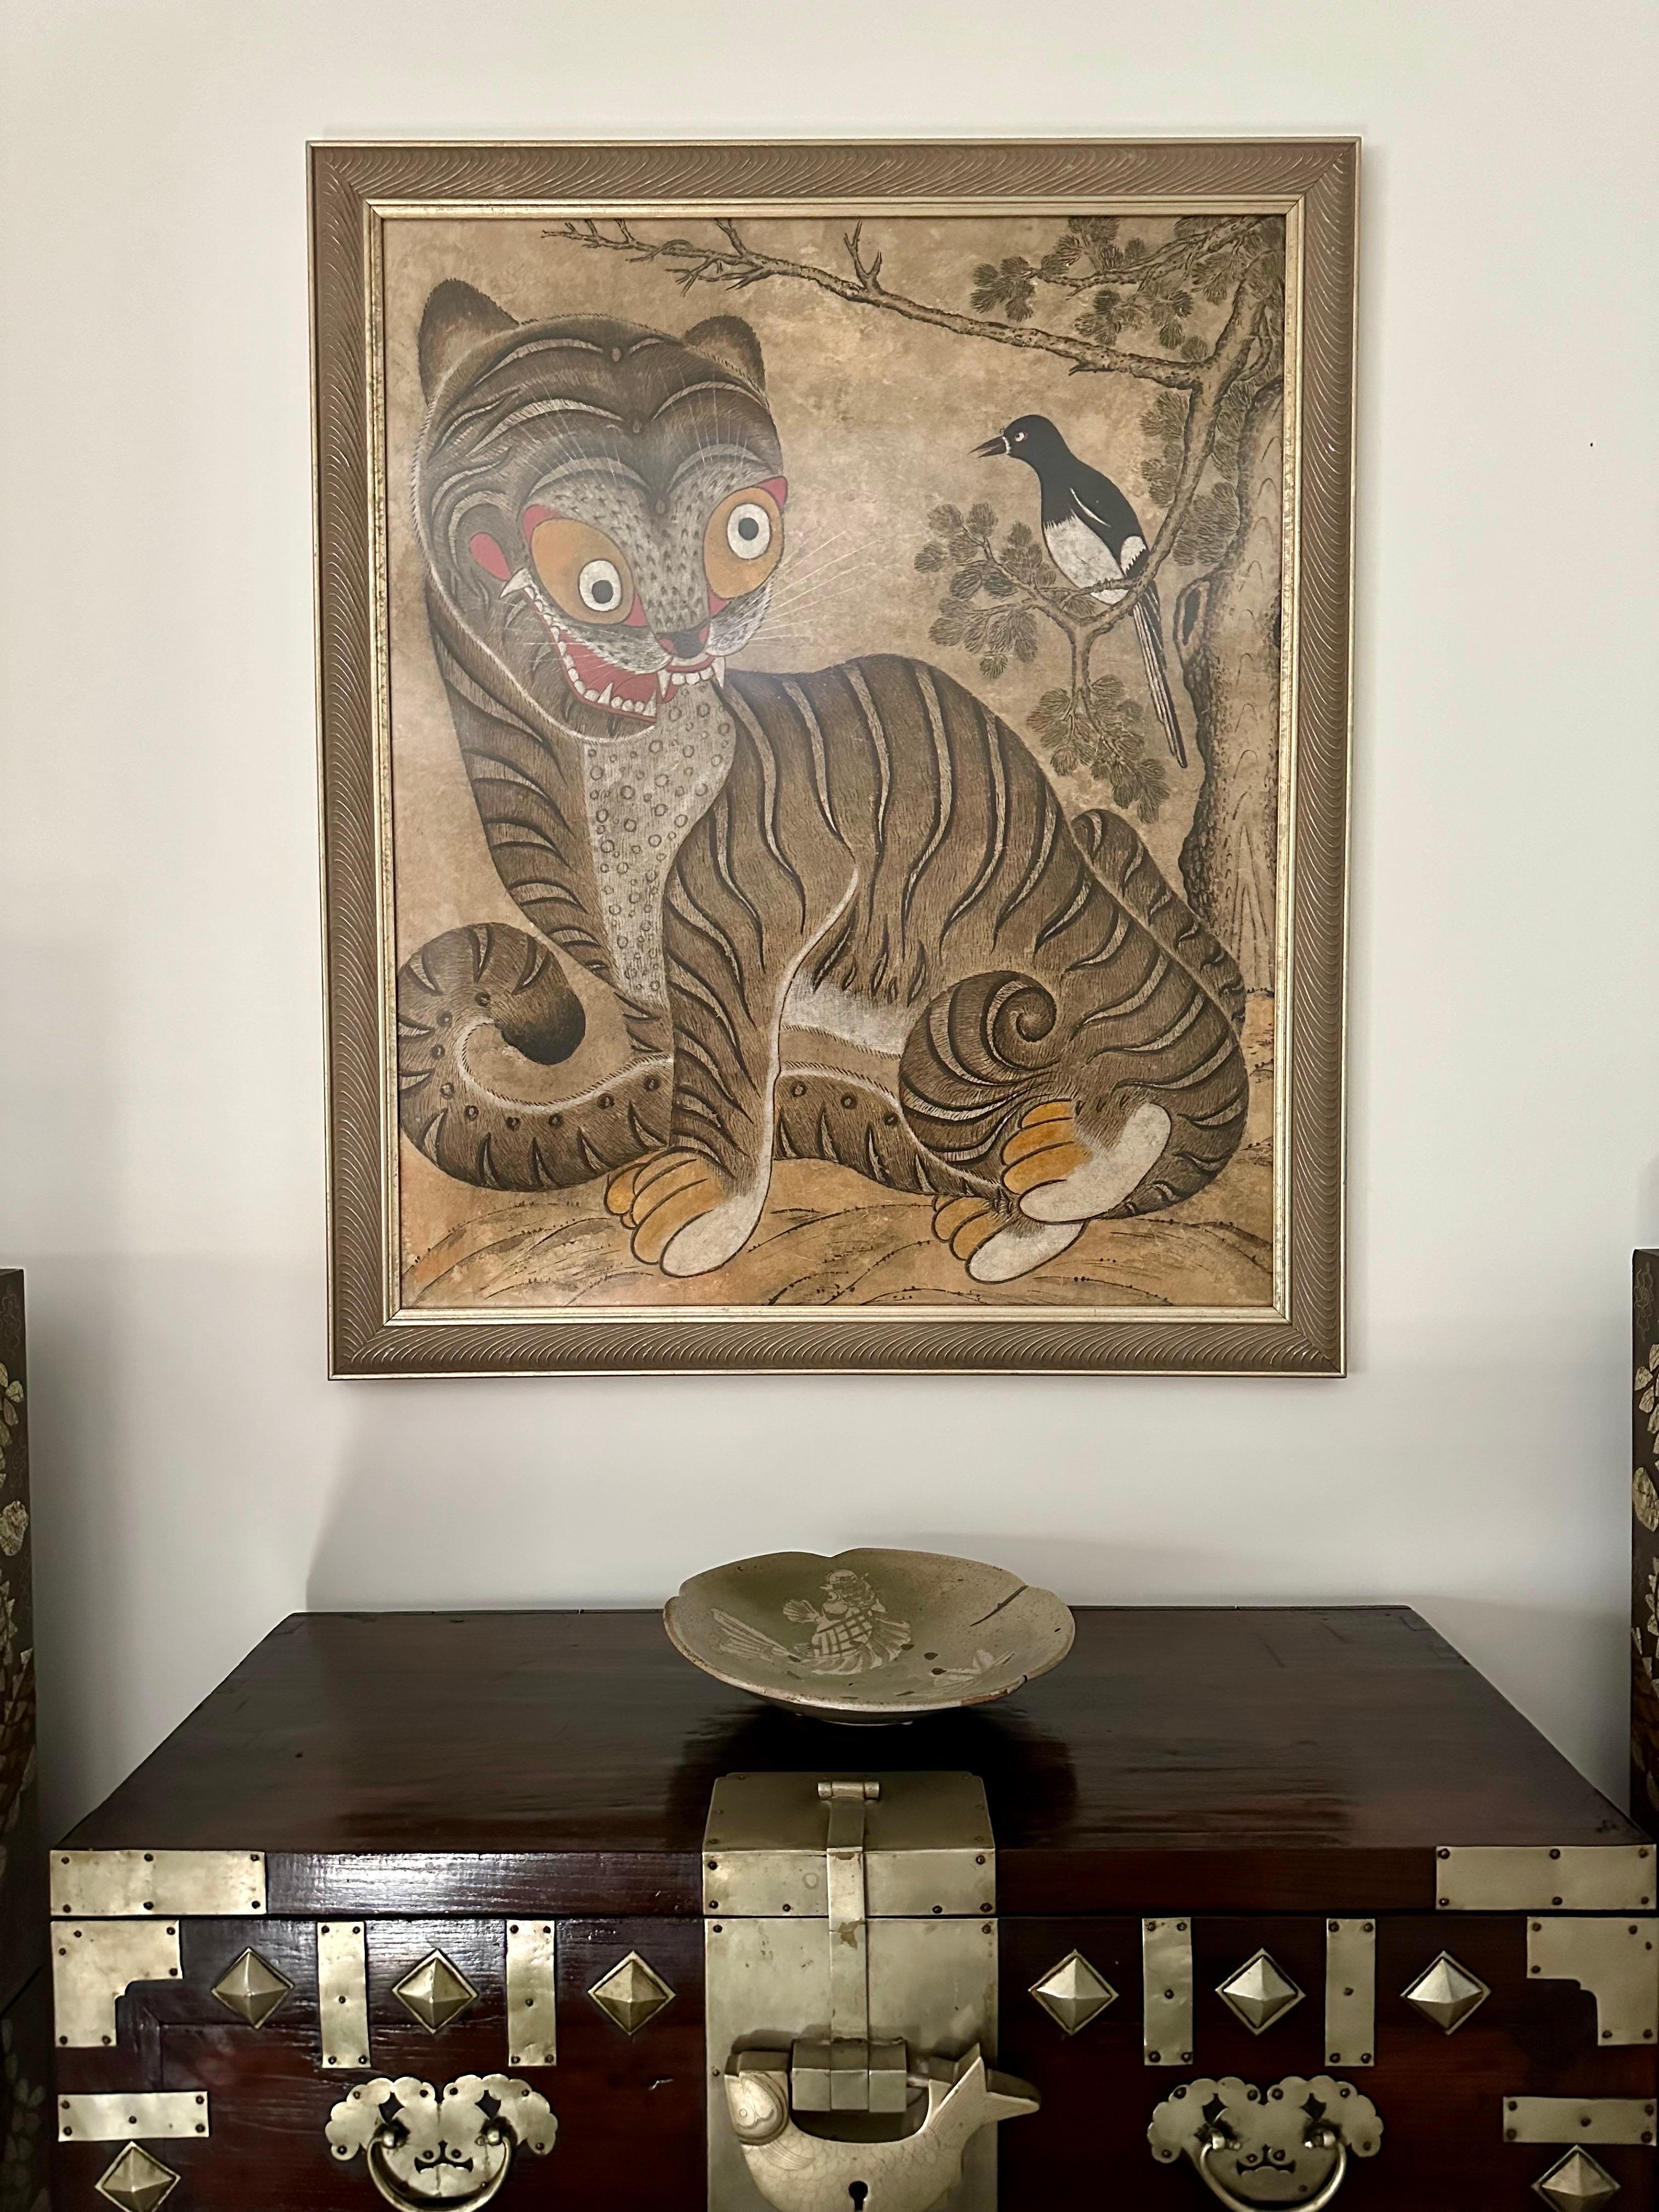 A large Korean folk-art painting framed in a carved gilt frame under museum-quality acrylic glass. The ink and watercolor on paper was dated circa late 19th century to turn of the 20th century toward the end of Joseon dynasty. The work depicts a